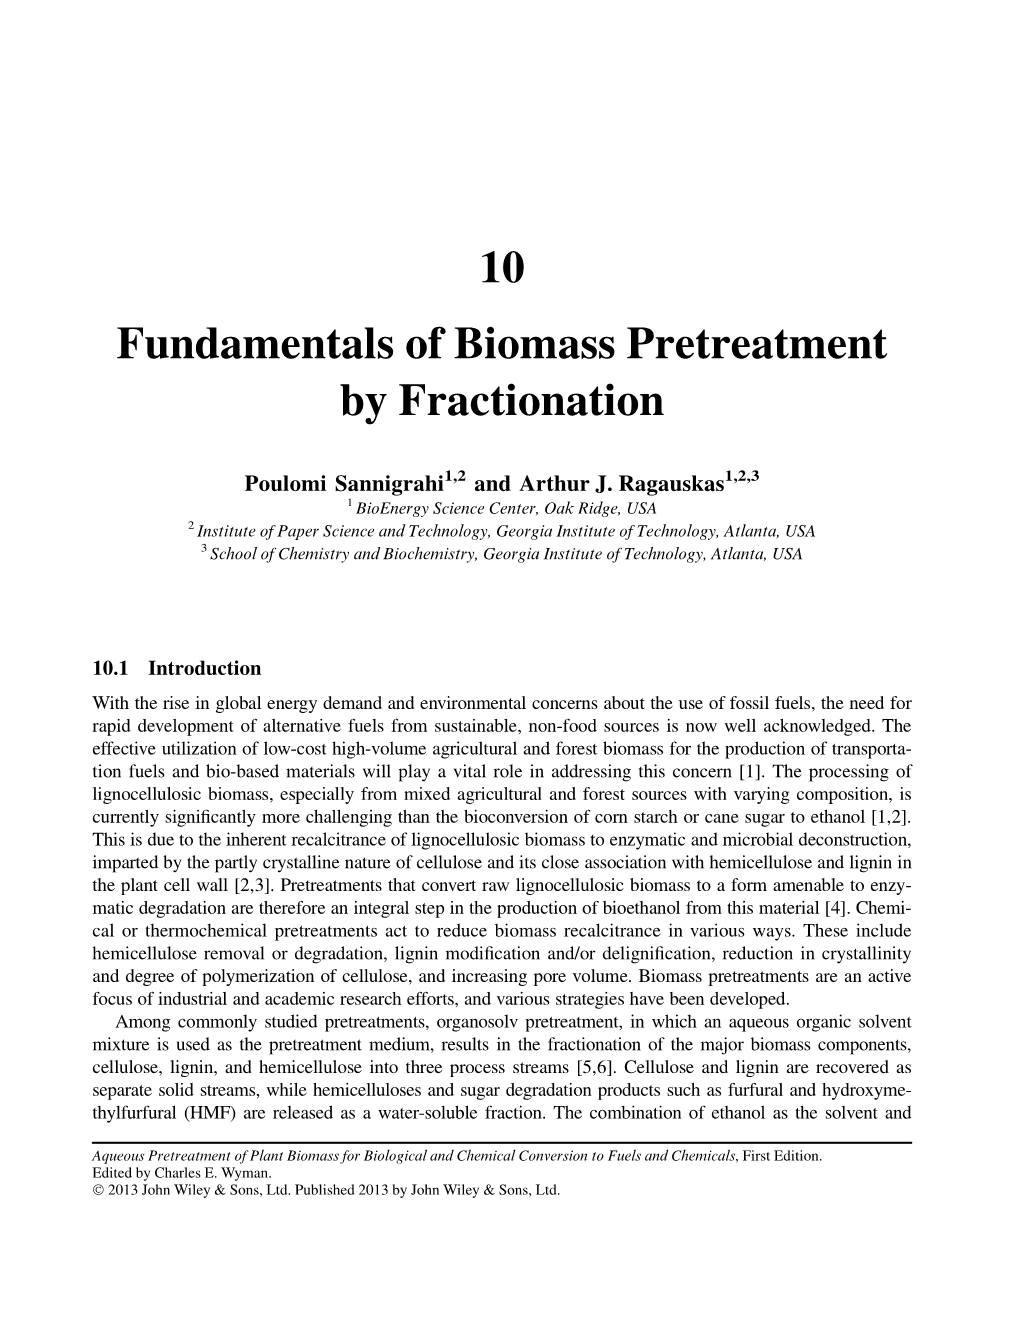 Fundamentals of Biomass Pretreatment by Fractionation